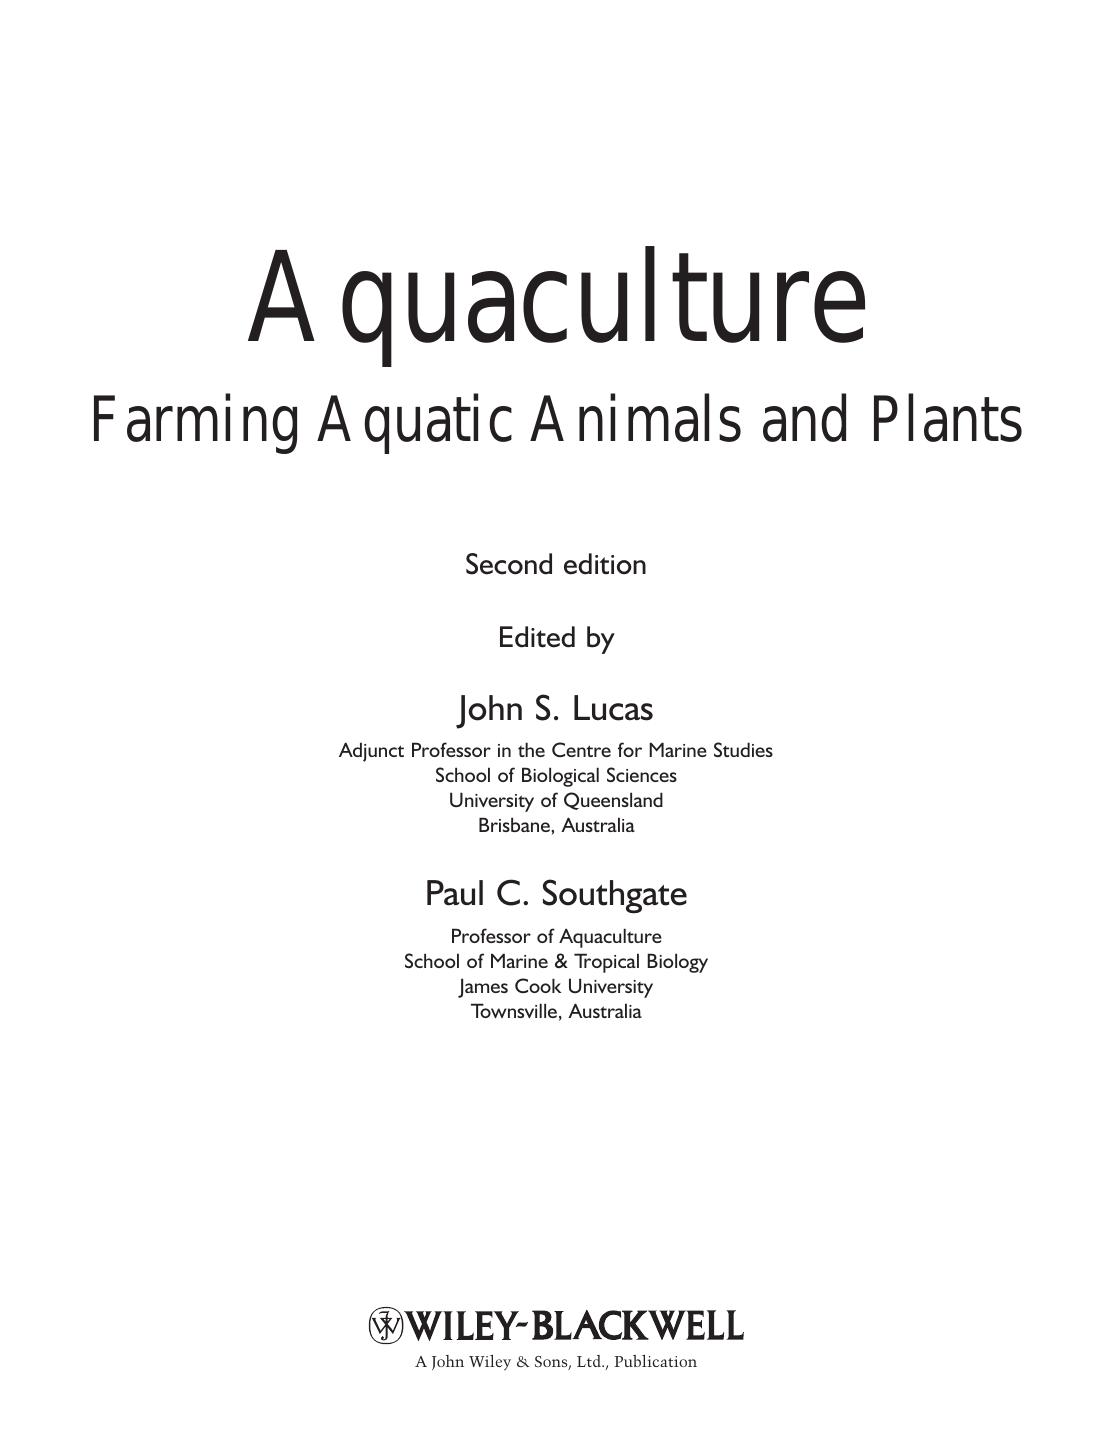 Aquaculture, Second edition-Wiley-Blackwell (2012)